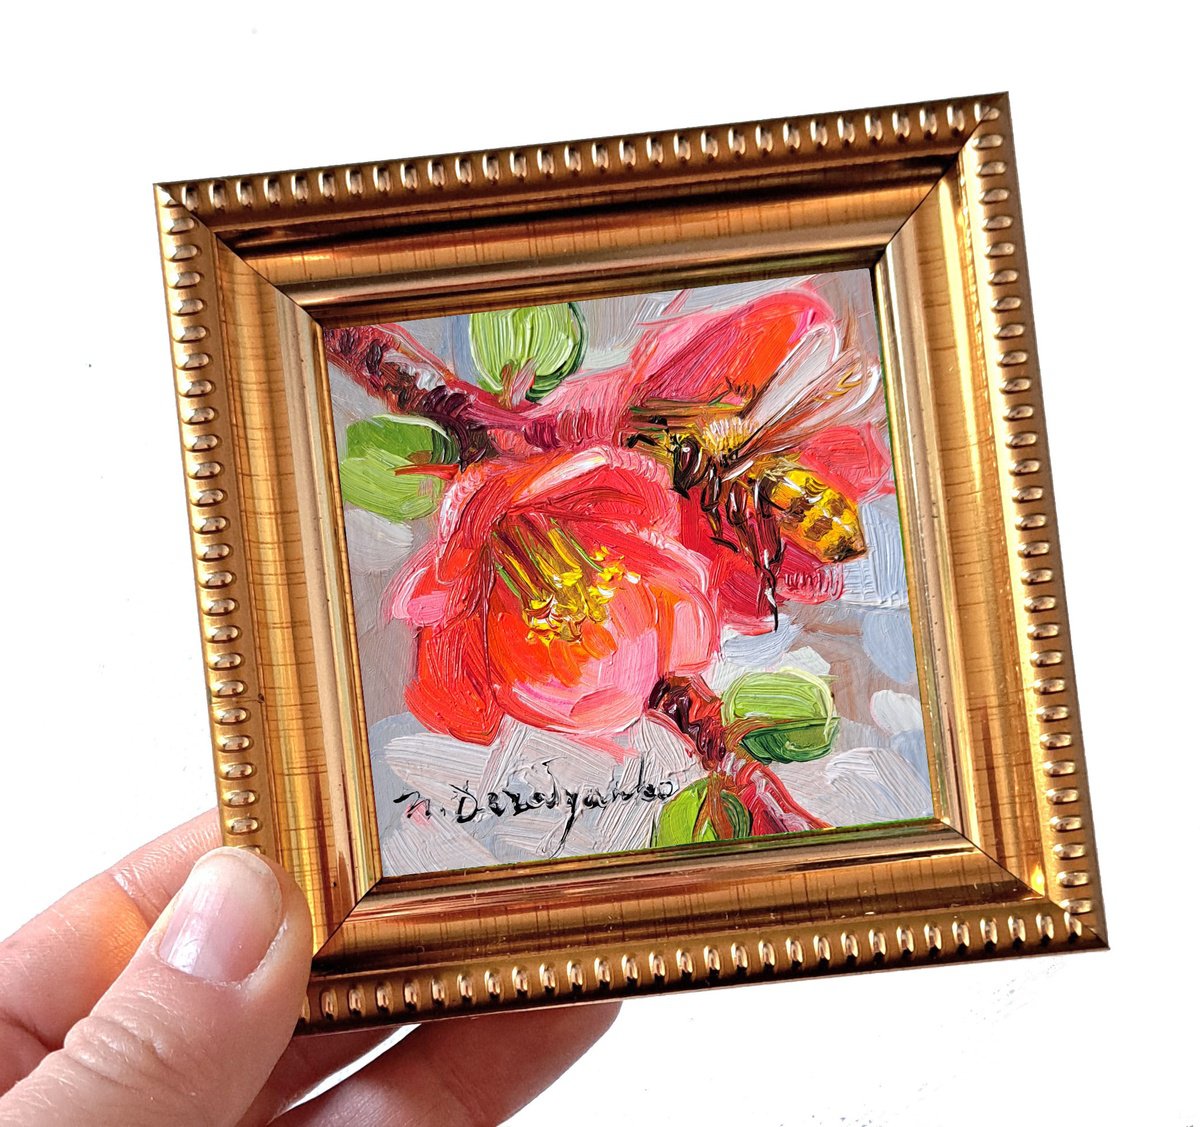 Bee painting original 3x3, Bee art tiny oil painting red framed art gift for girlfriend by Nataly Derevyanko